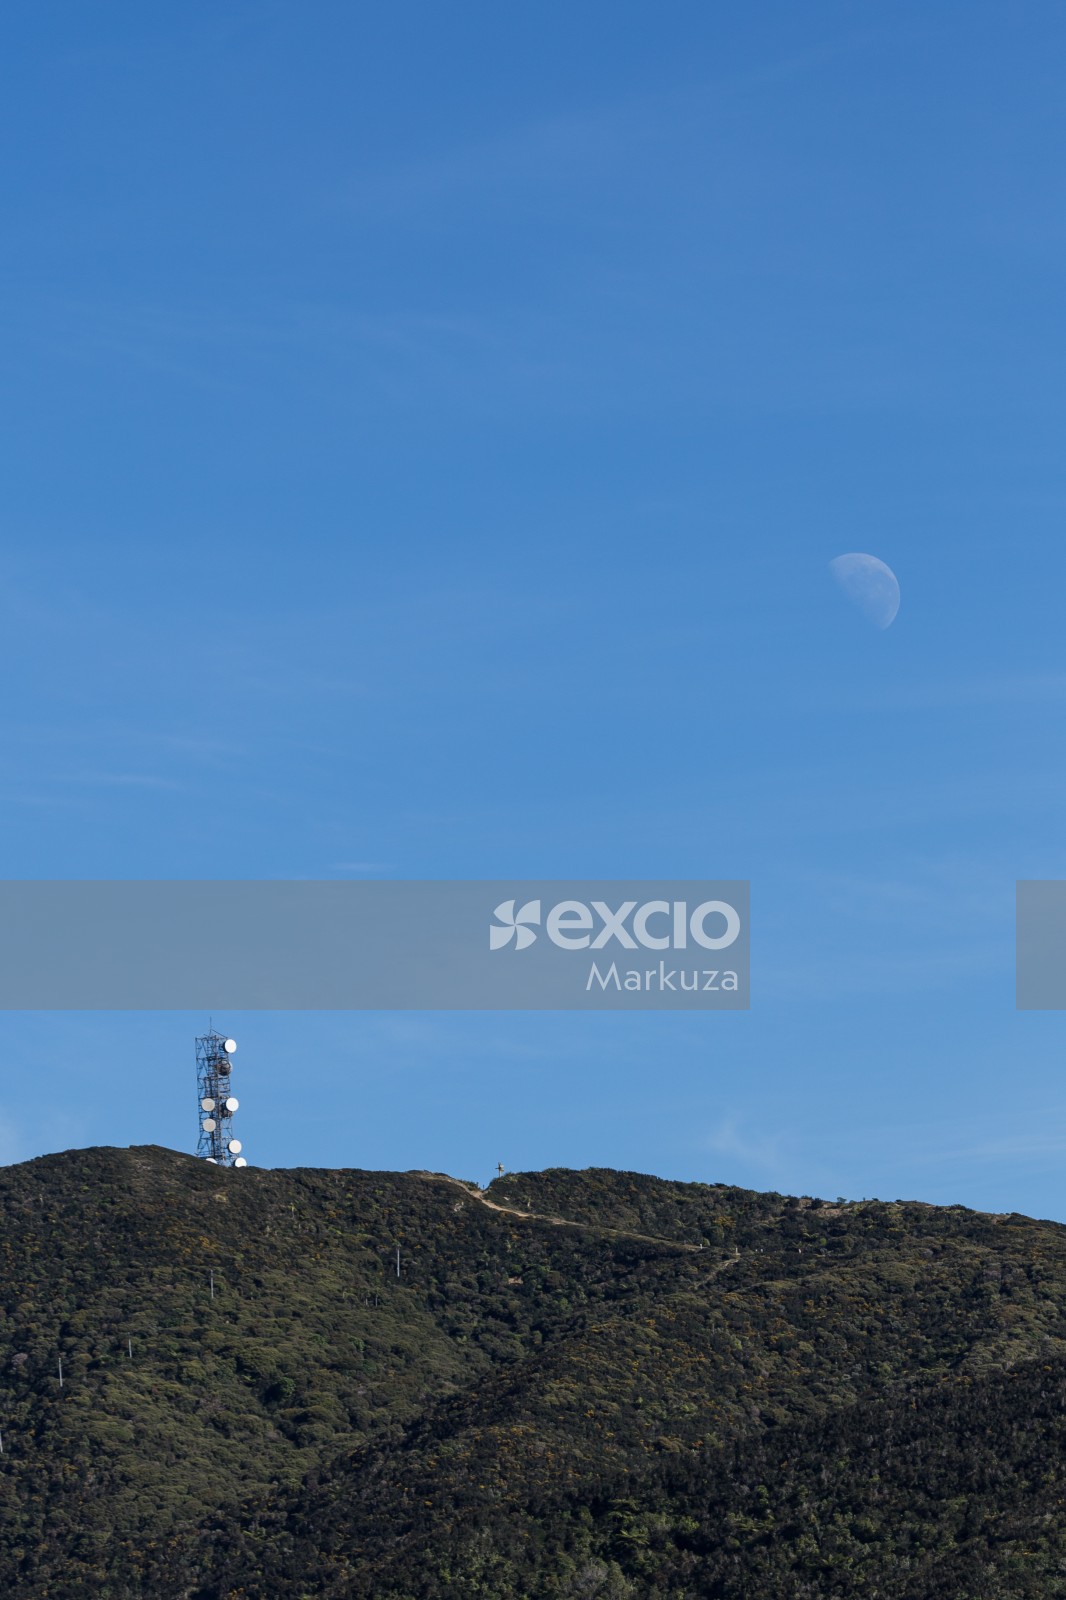 Communication tower on hill and moon